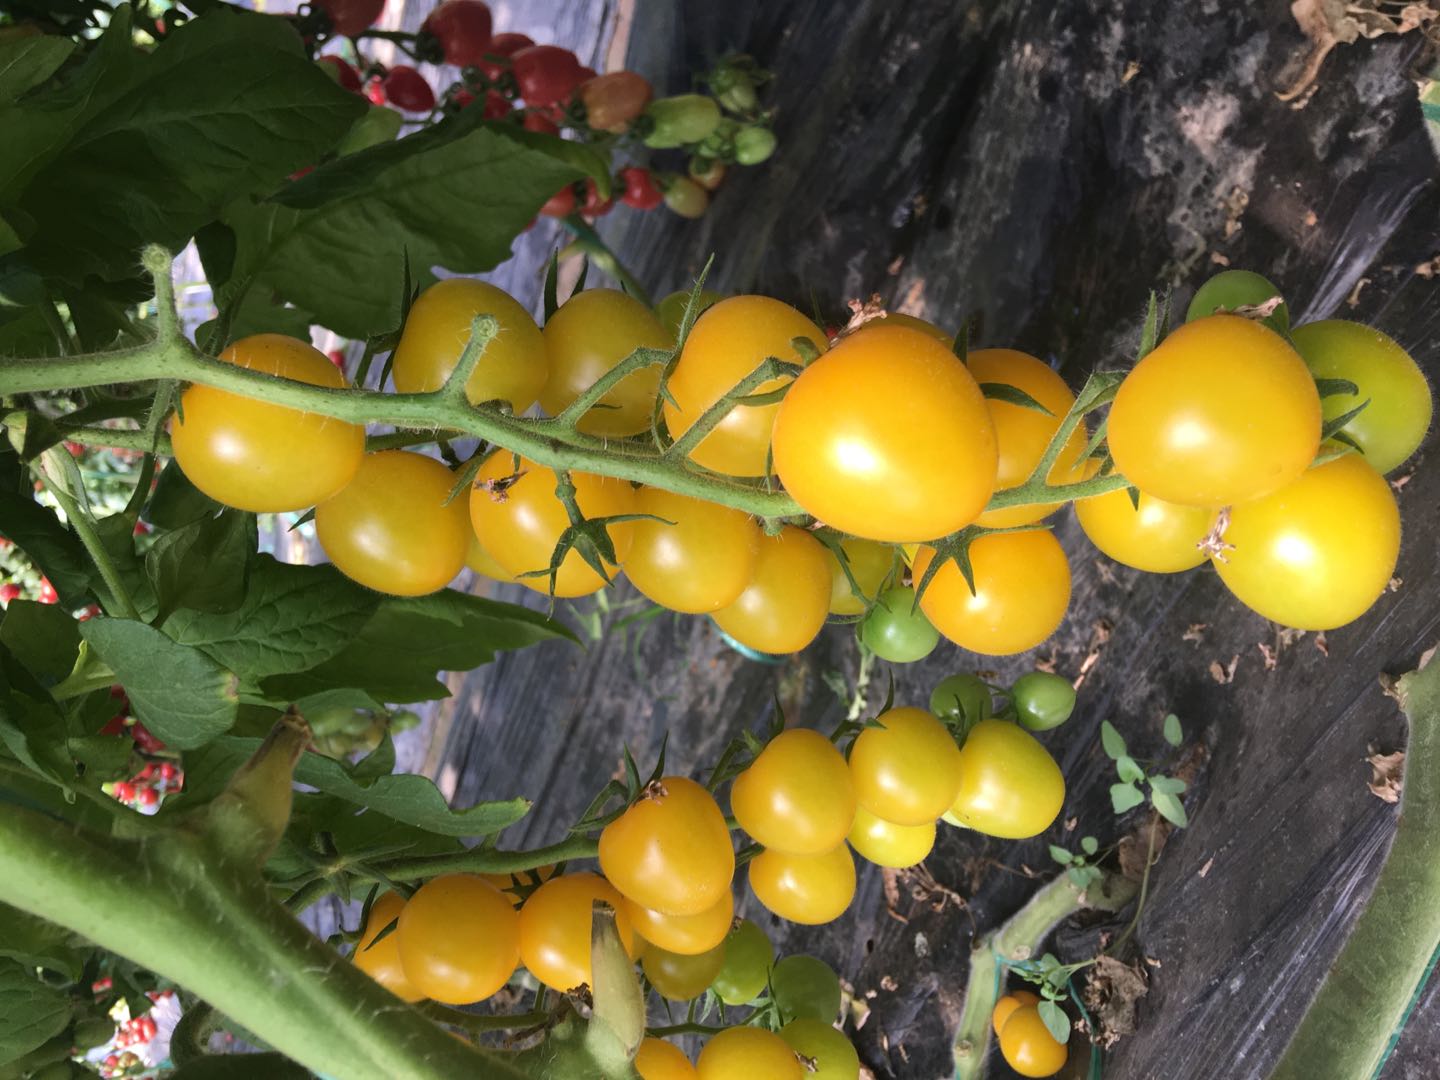 Chinese high yield Golden yellow orange cherry hybrid tomato seeds for planting